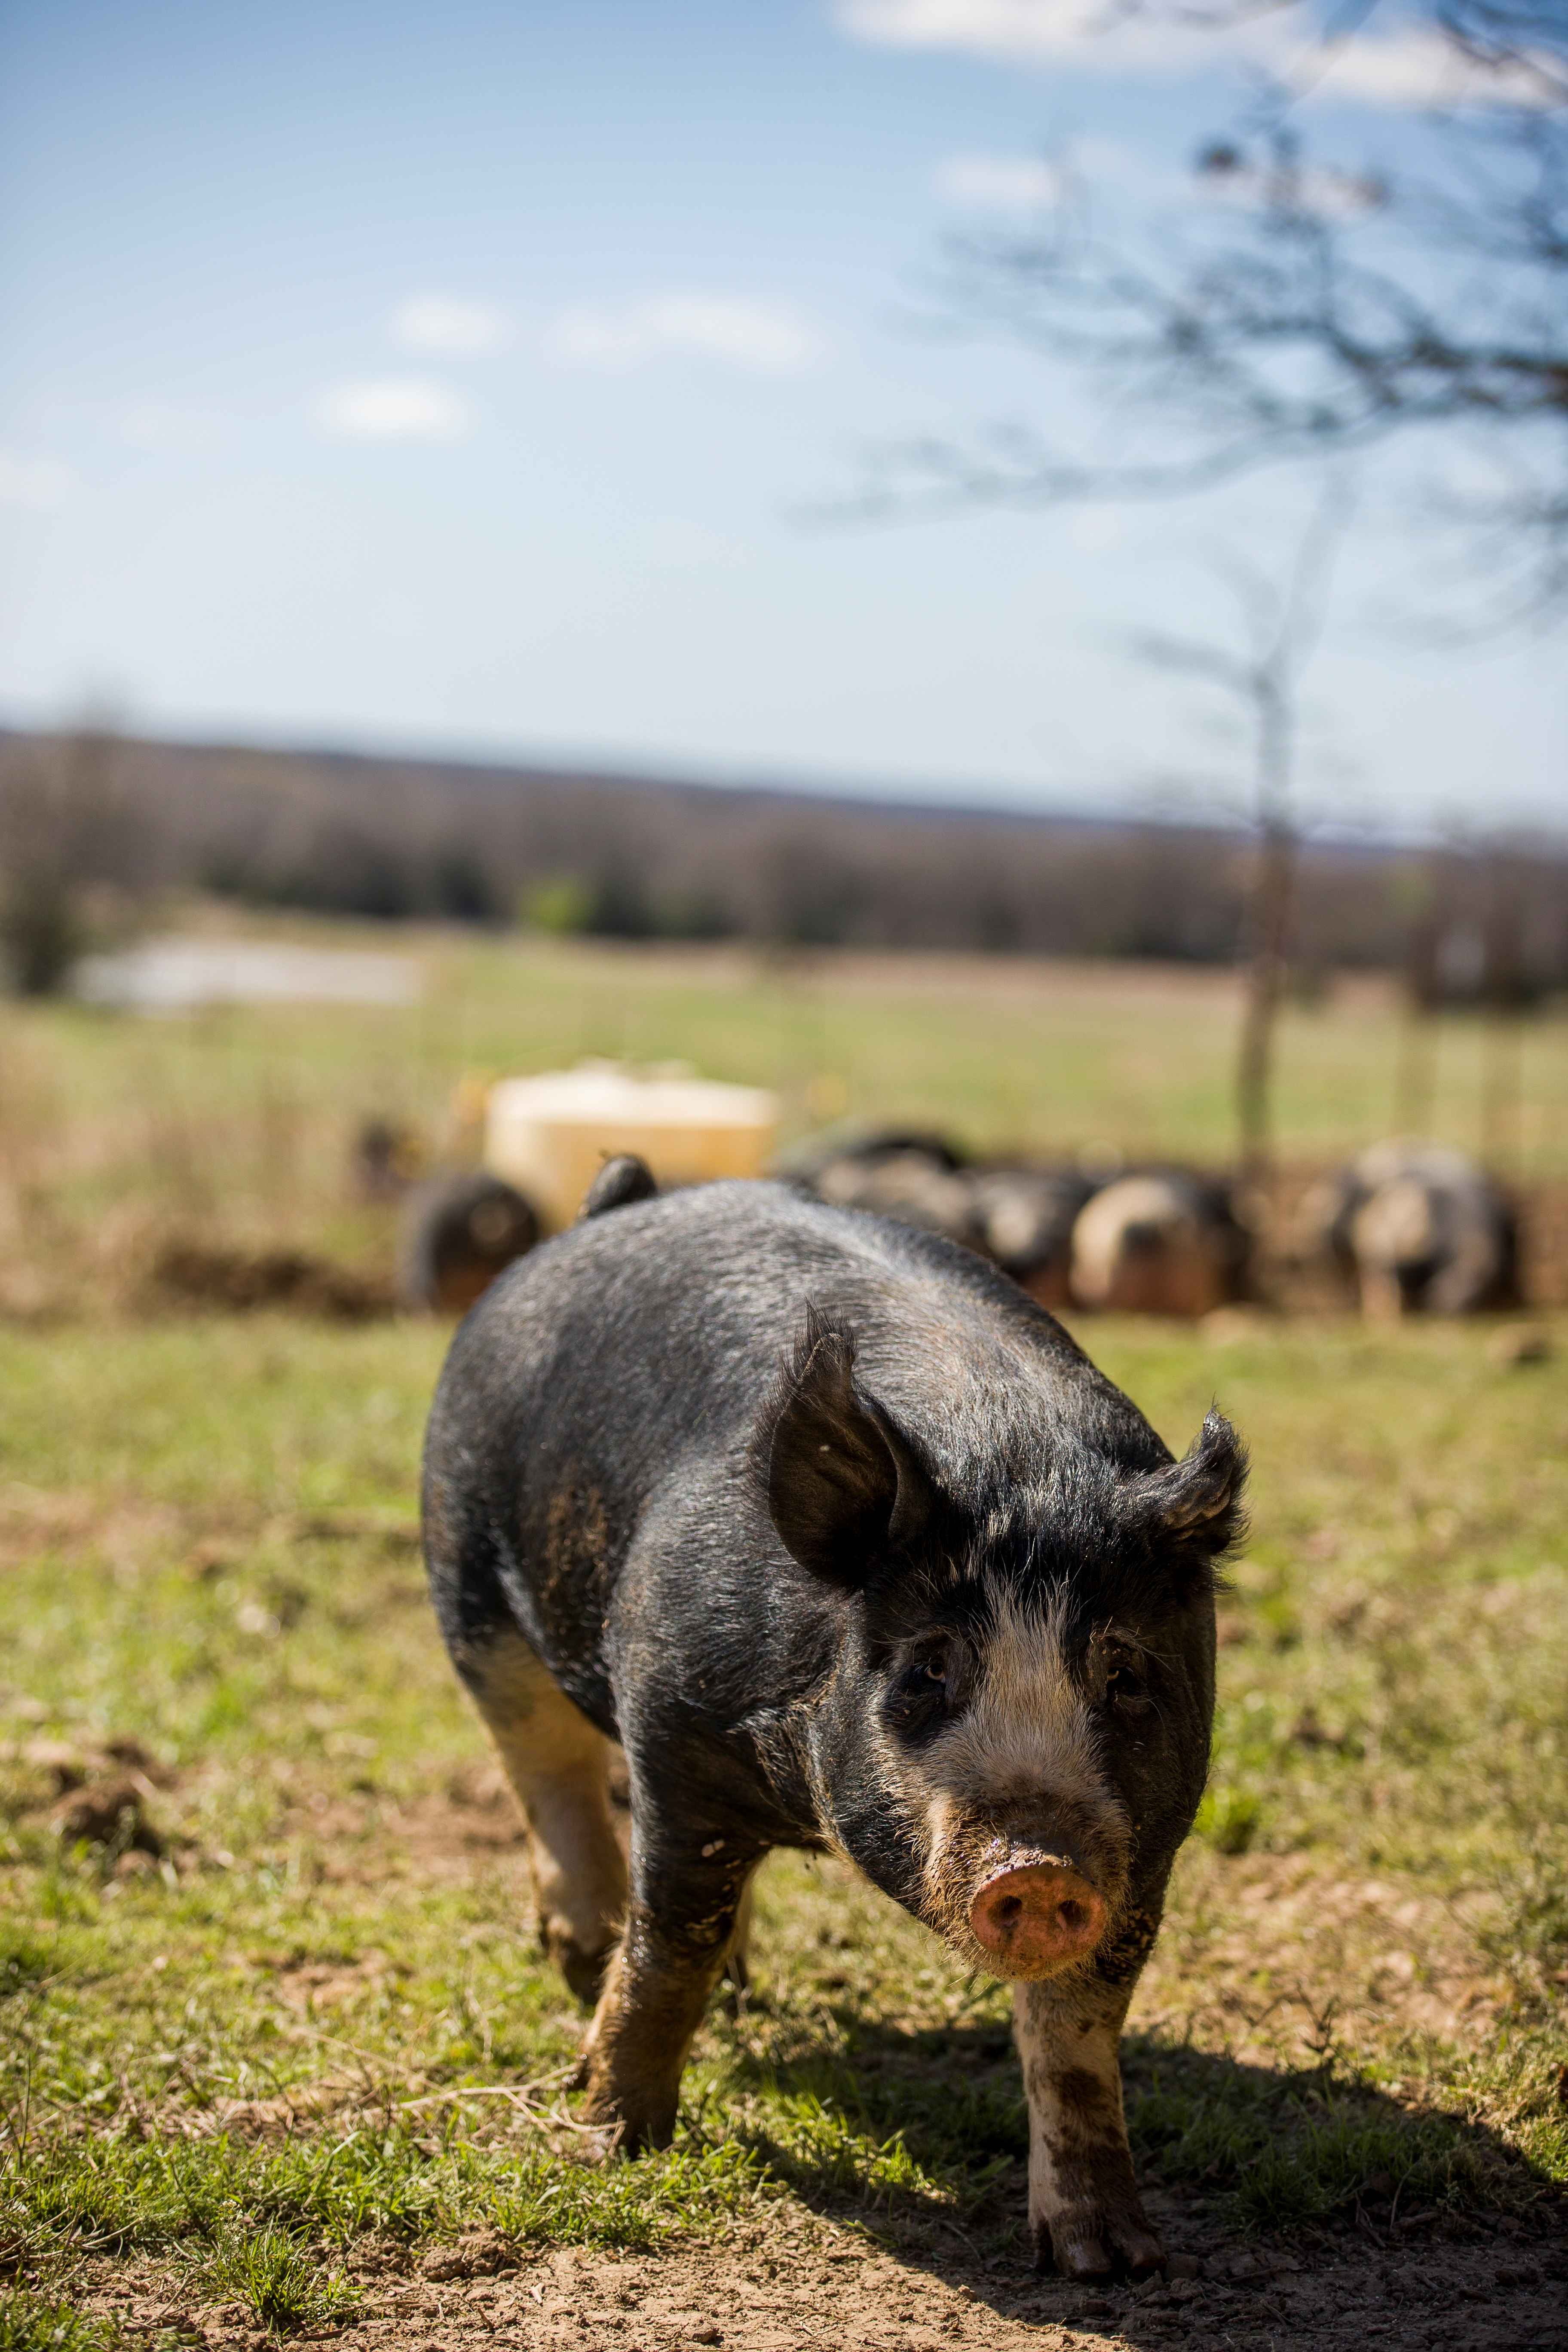 Pasture-raised pig at Prairie Creek Farms in Oklahoma / Photograph by Shane Bevel for Kirkpatrick Foundation